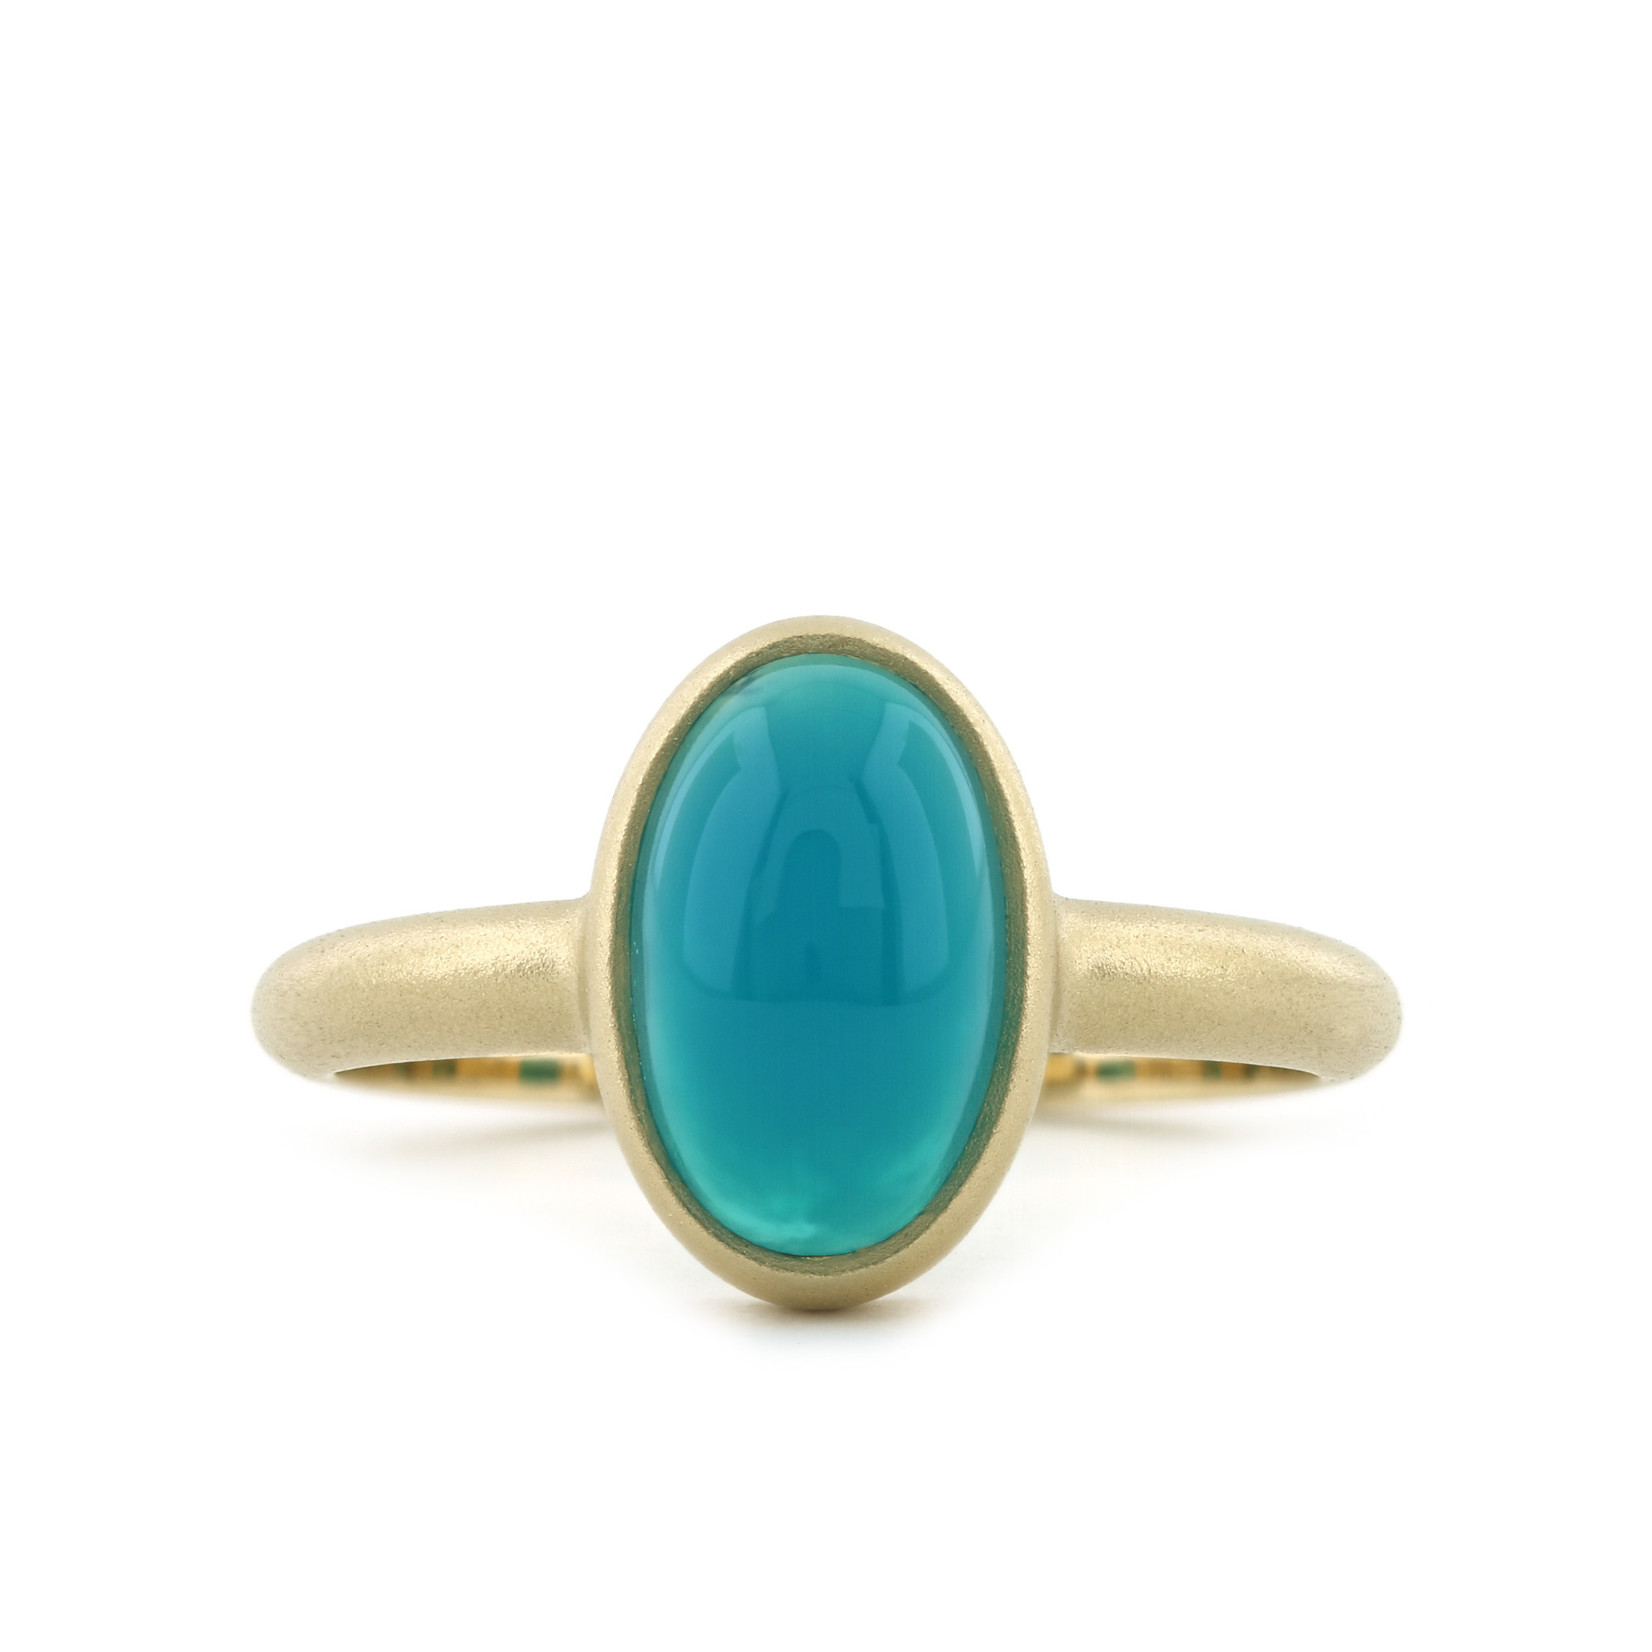 Baxter Moerman Kira Ring with Gem Silica in Gold